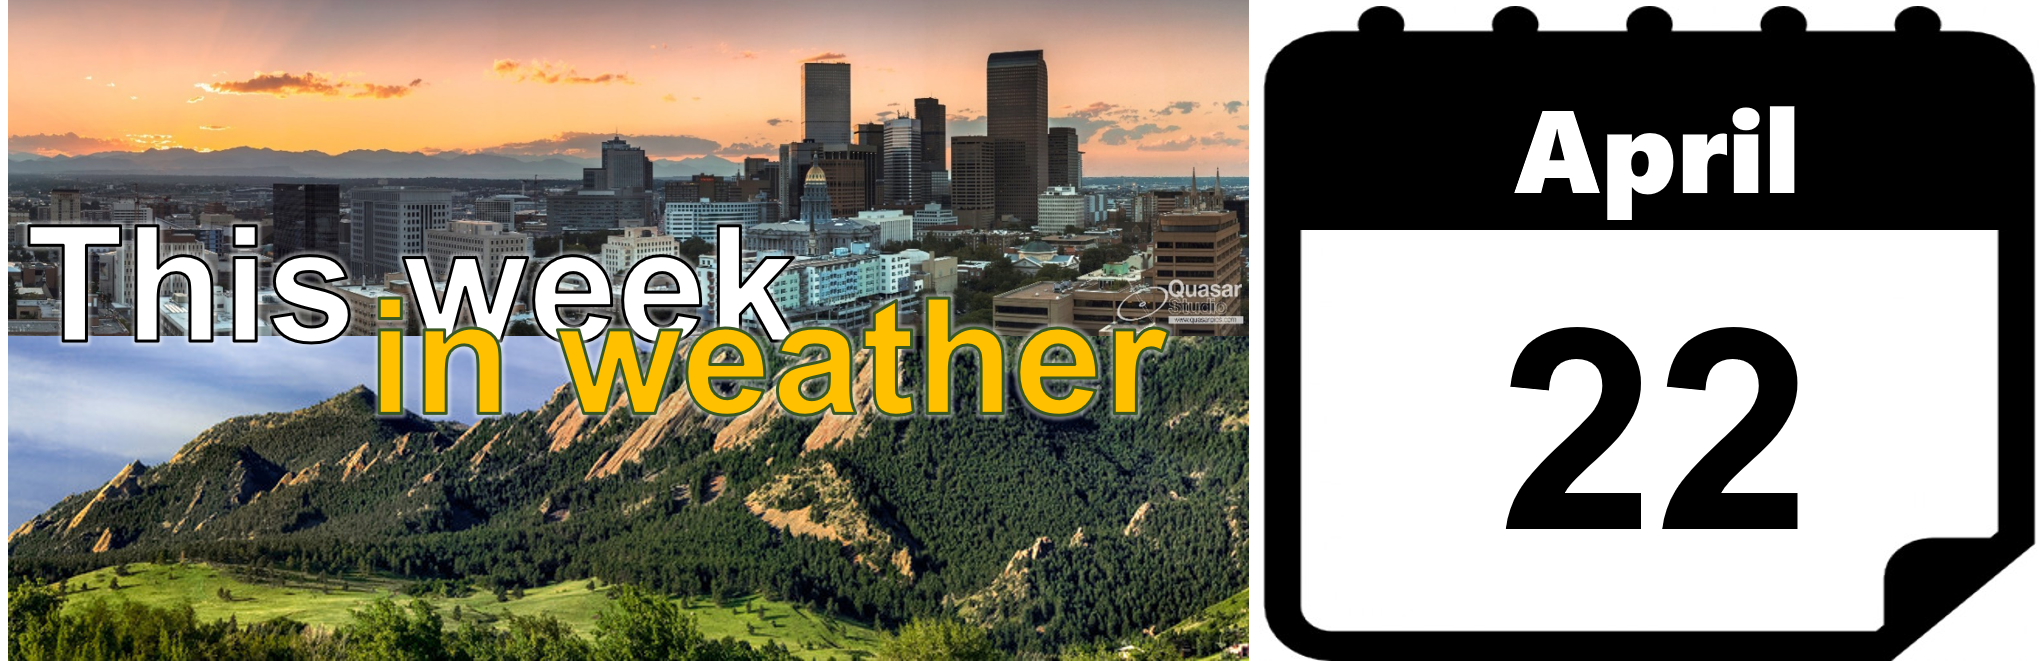 This week in weather April 22, 2019 BoulderCAST